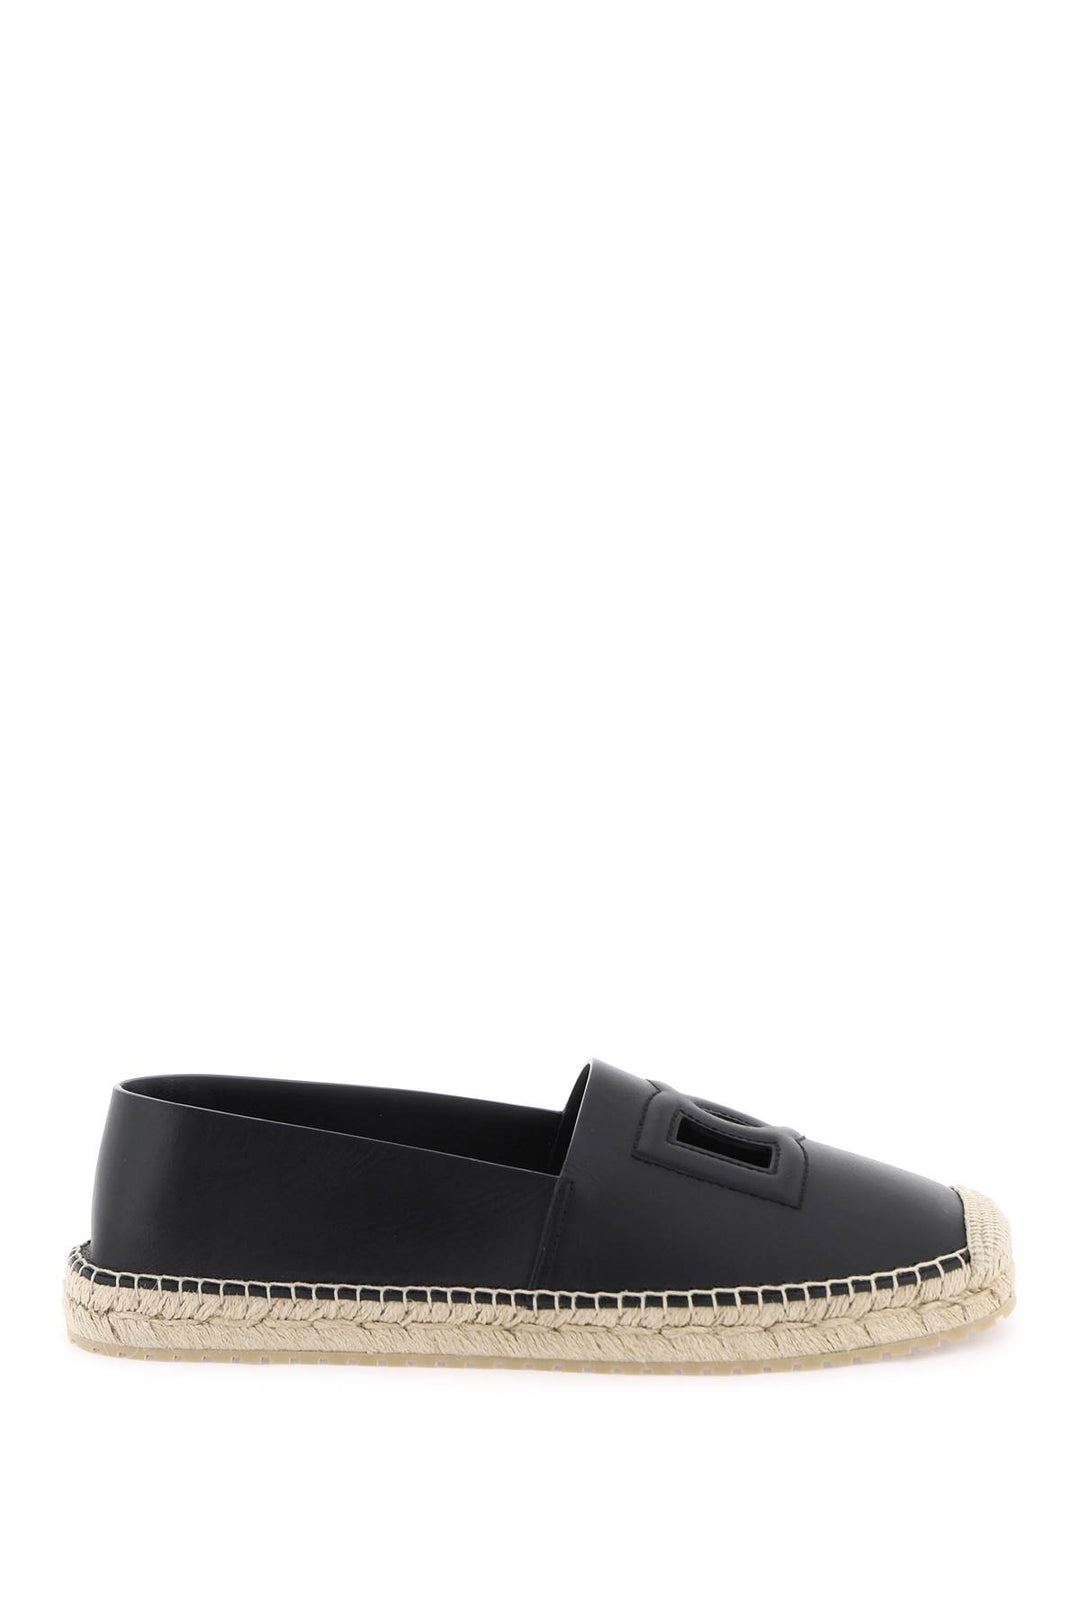 Dolce & gabbana leather espadrilles with dg logo and-0